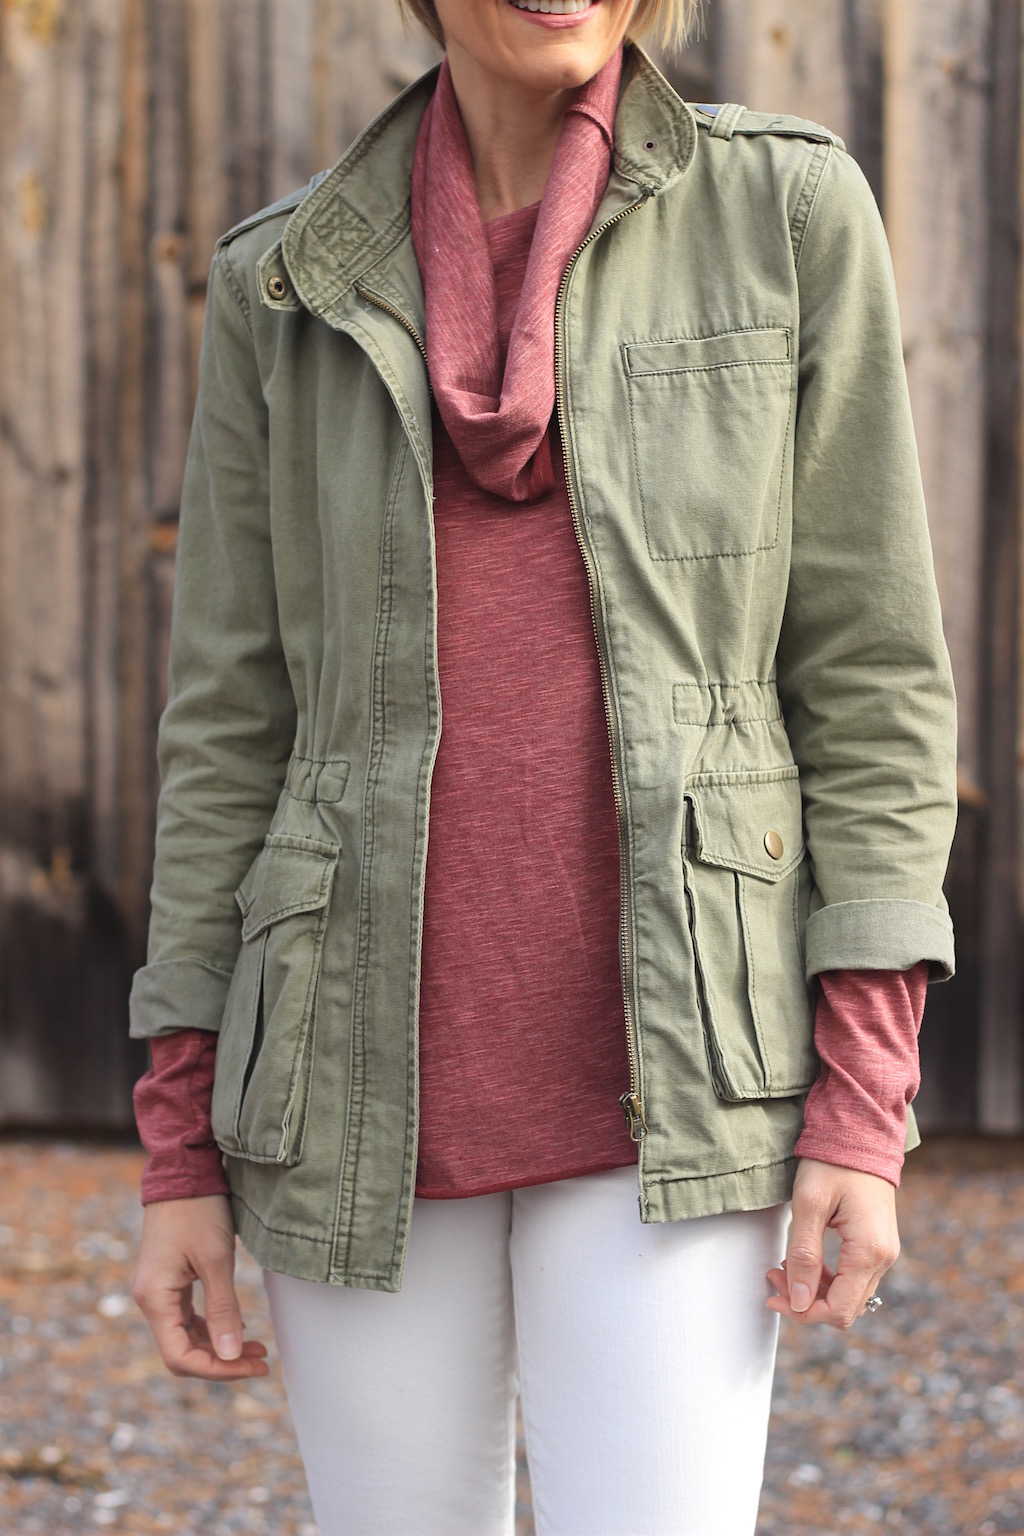 Must-have Anorak | A Lovely Living